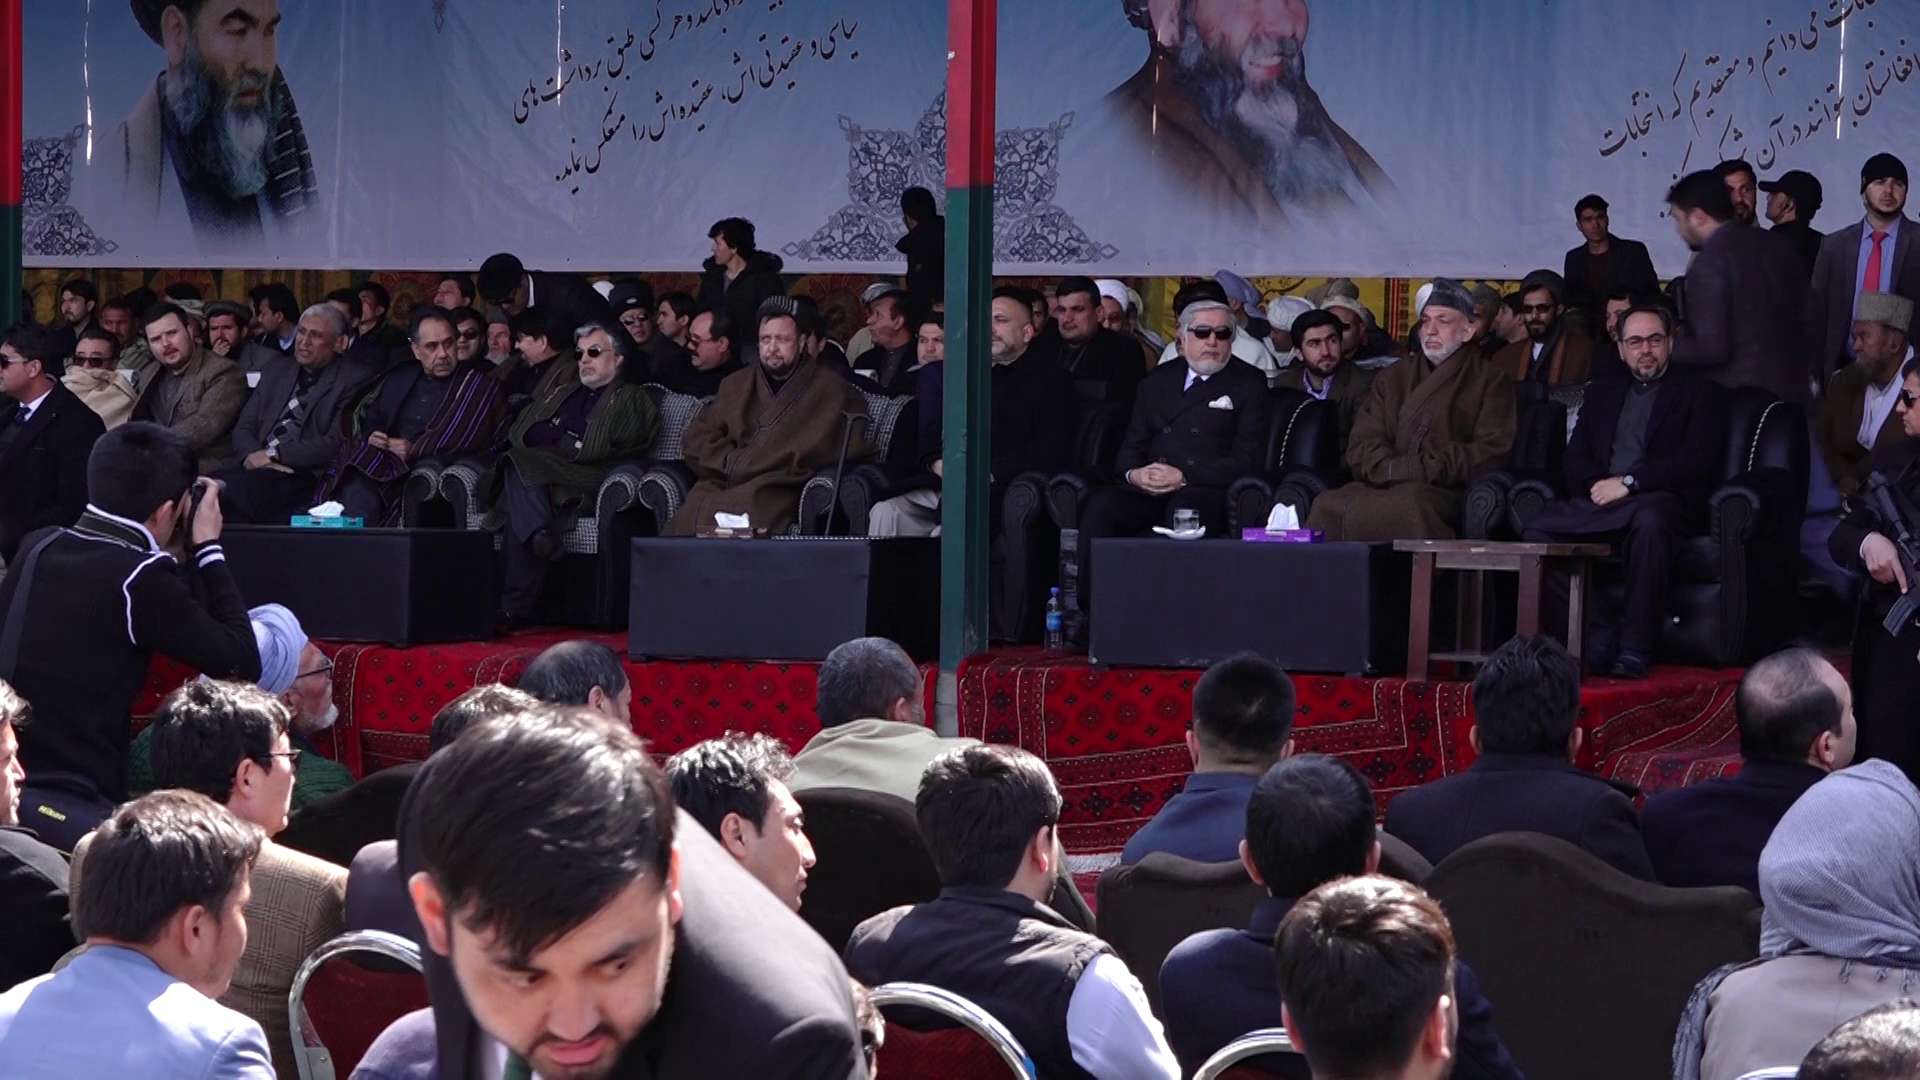 Mohaqiq said such incidents show government’s weakness or it shows that “government is collaborating with such circles to use them as a tool against its political rivals in view of current sensitive situation”.